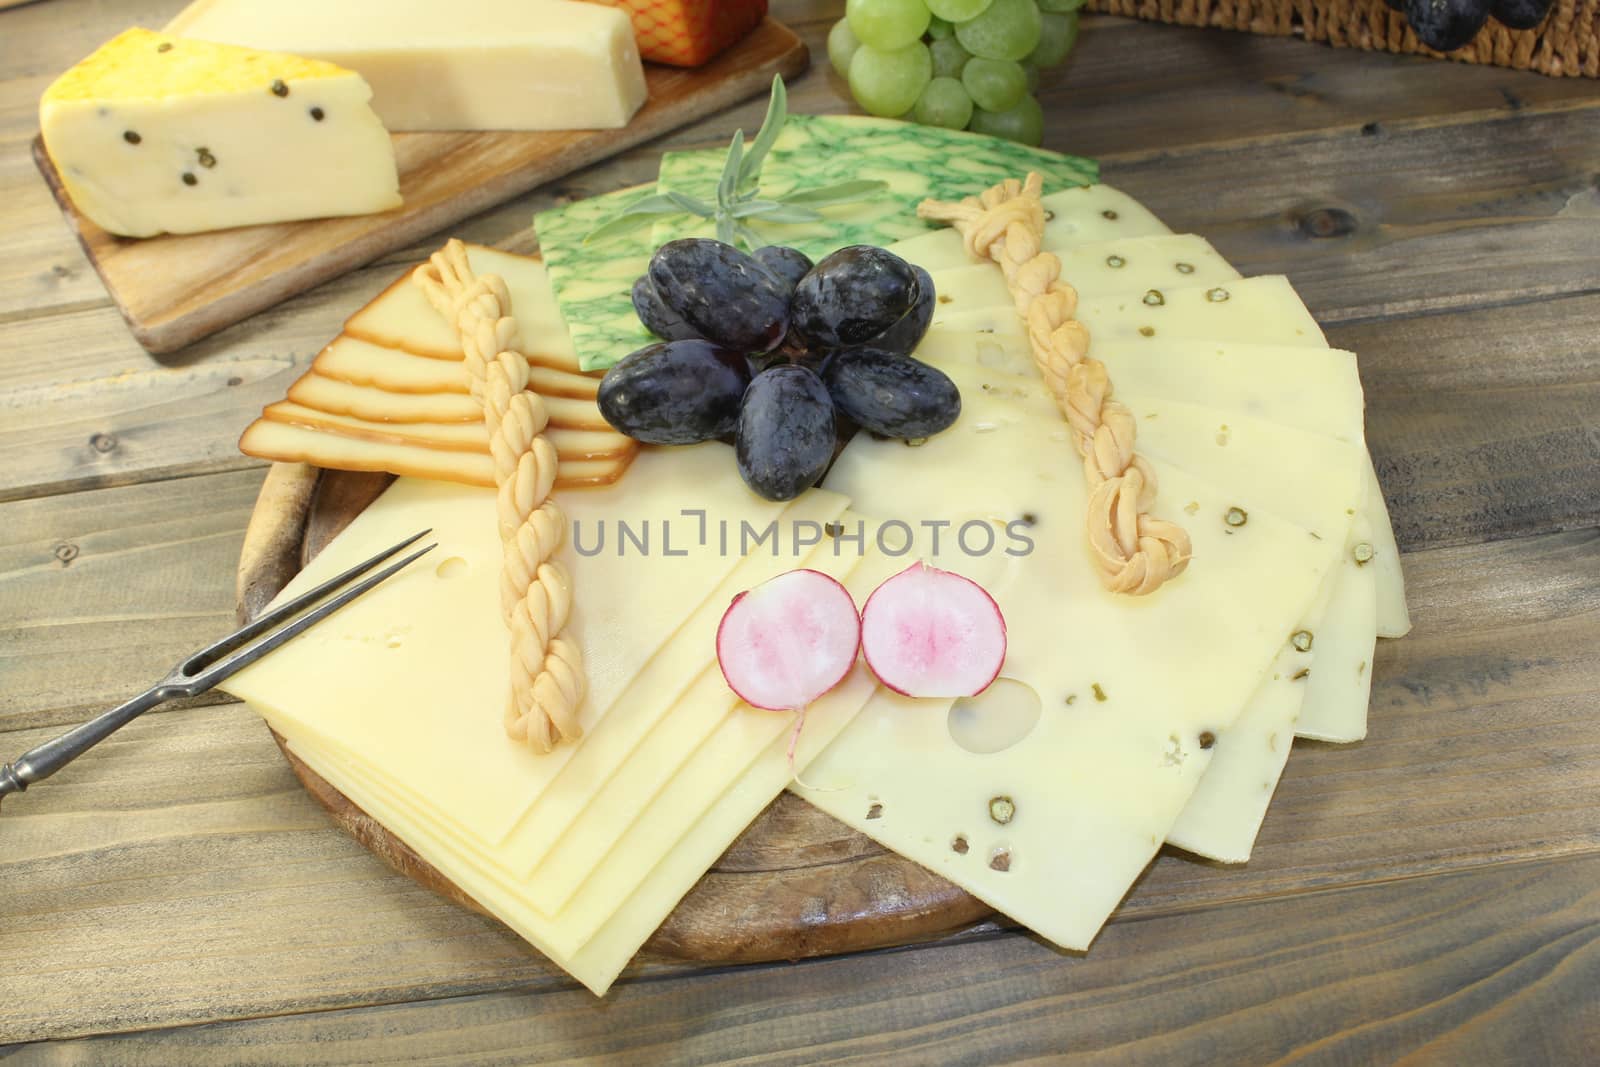 Slices of cheese with grapes, radishes and fork